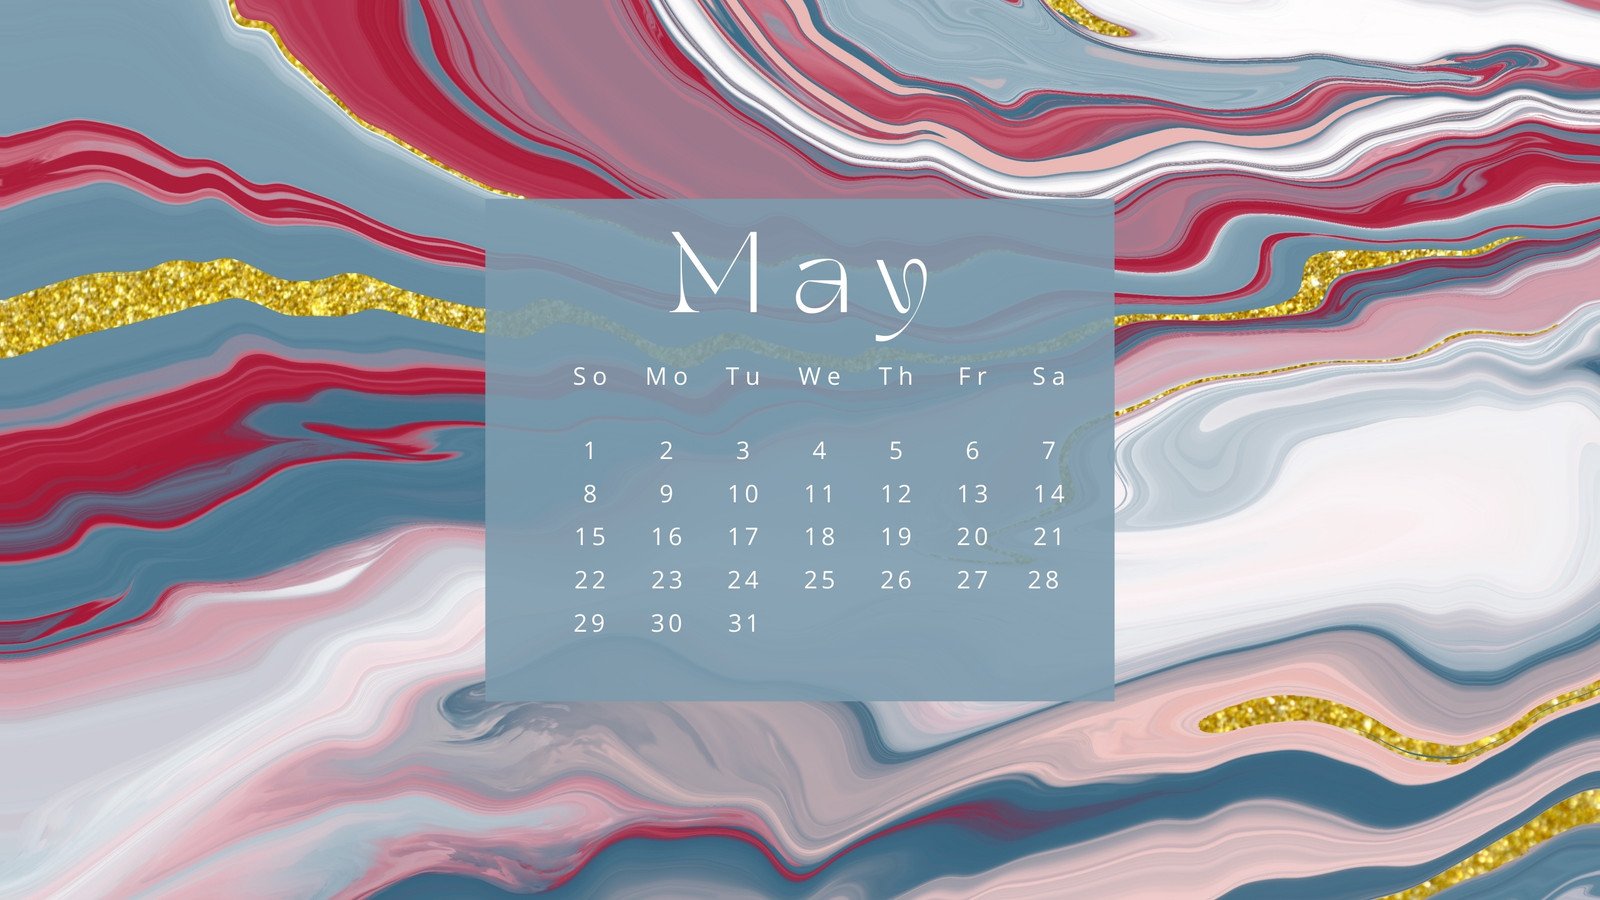 Calendars Wallpapers category Page 5 of 7  PixelsTalkNet